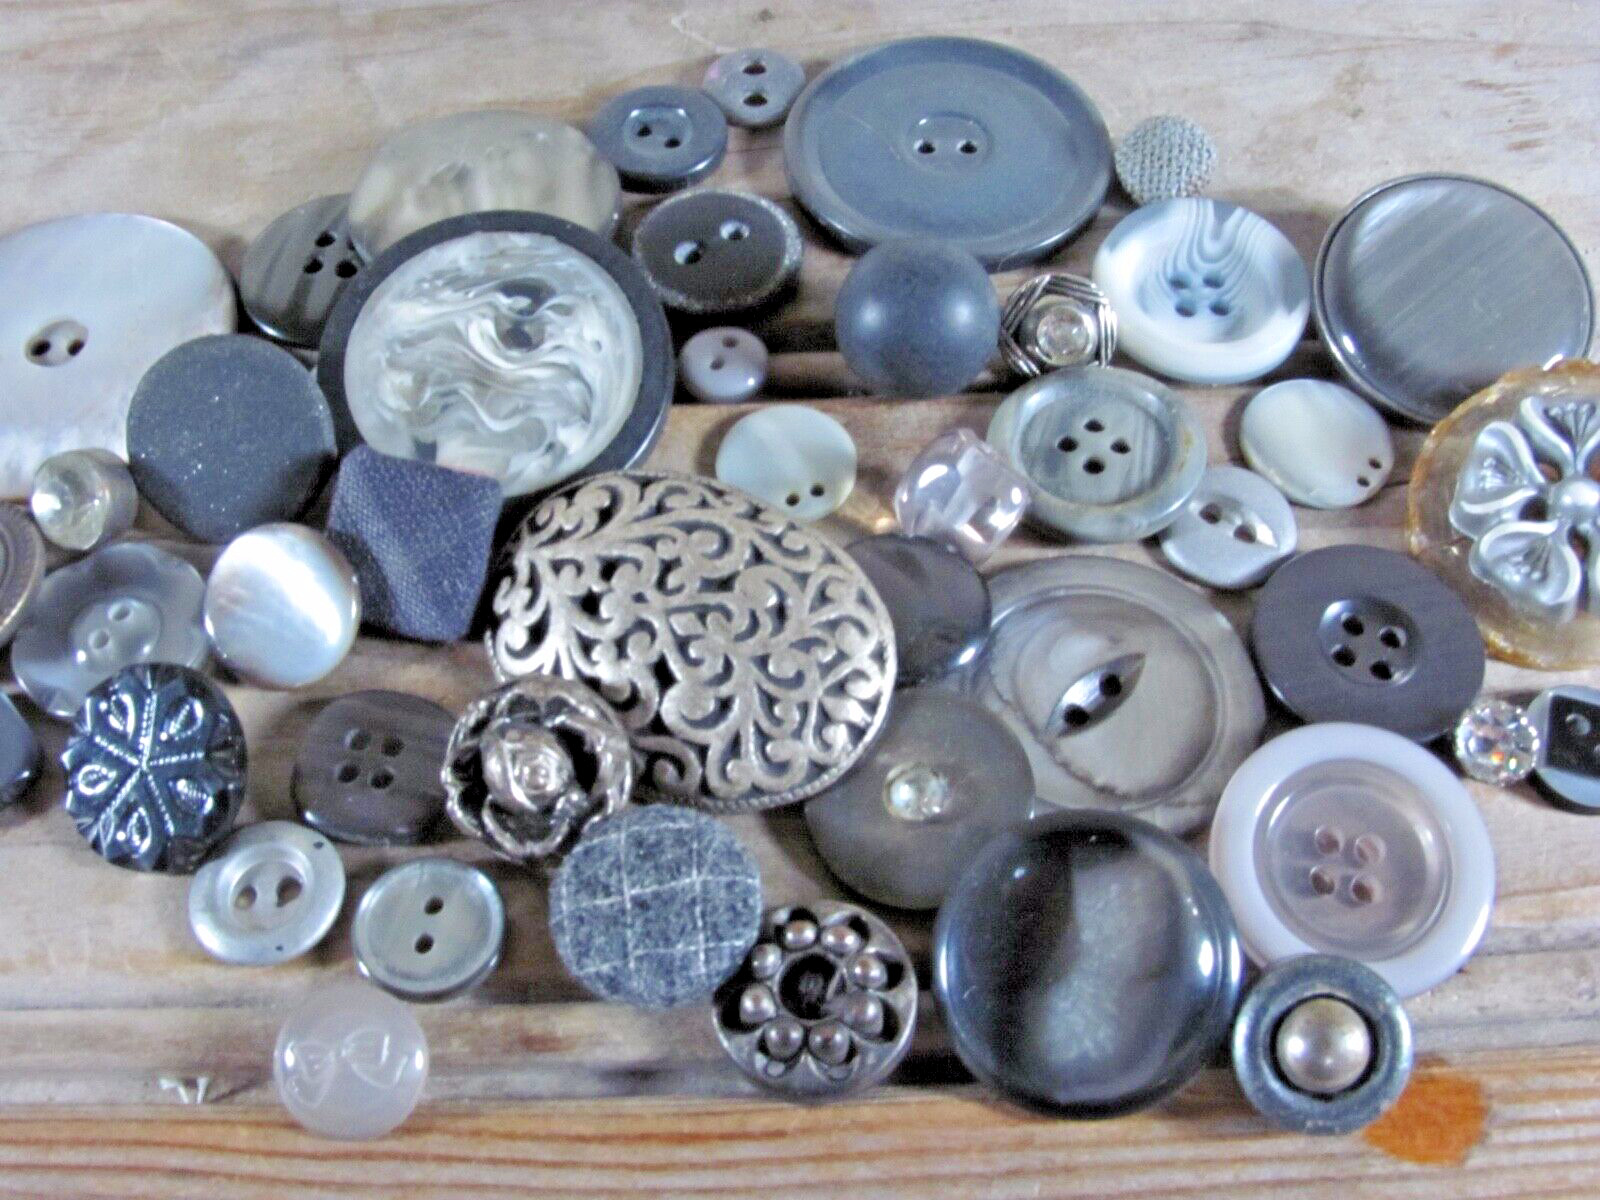 VTG Lot of 45+ gray buttons fancy plastic cloth metal mother of pearl flowers +